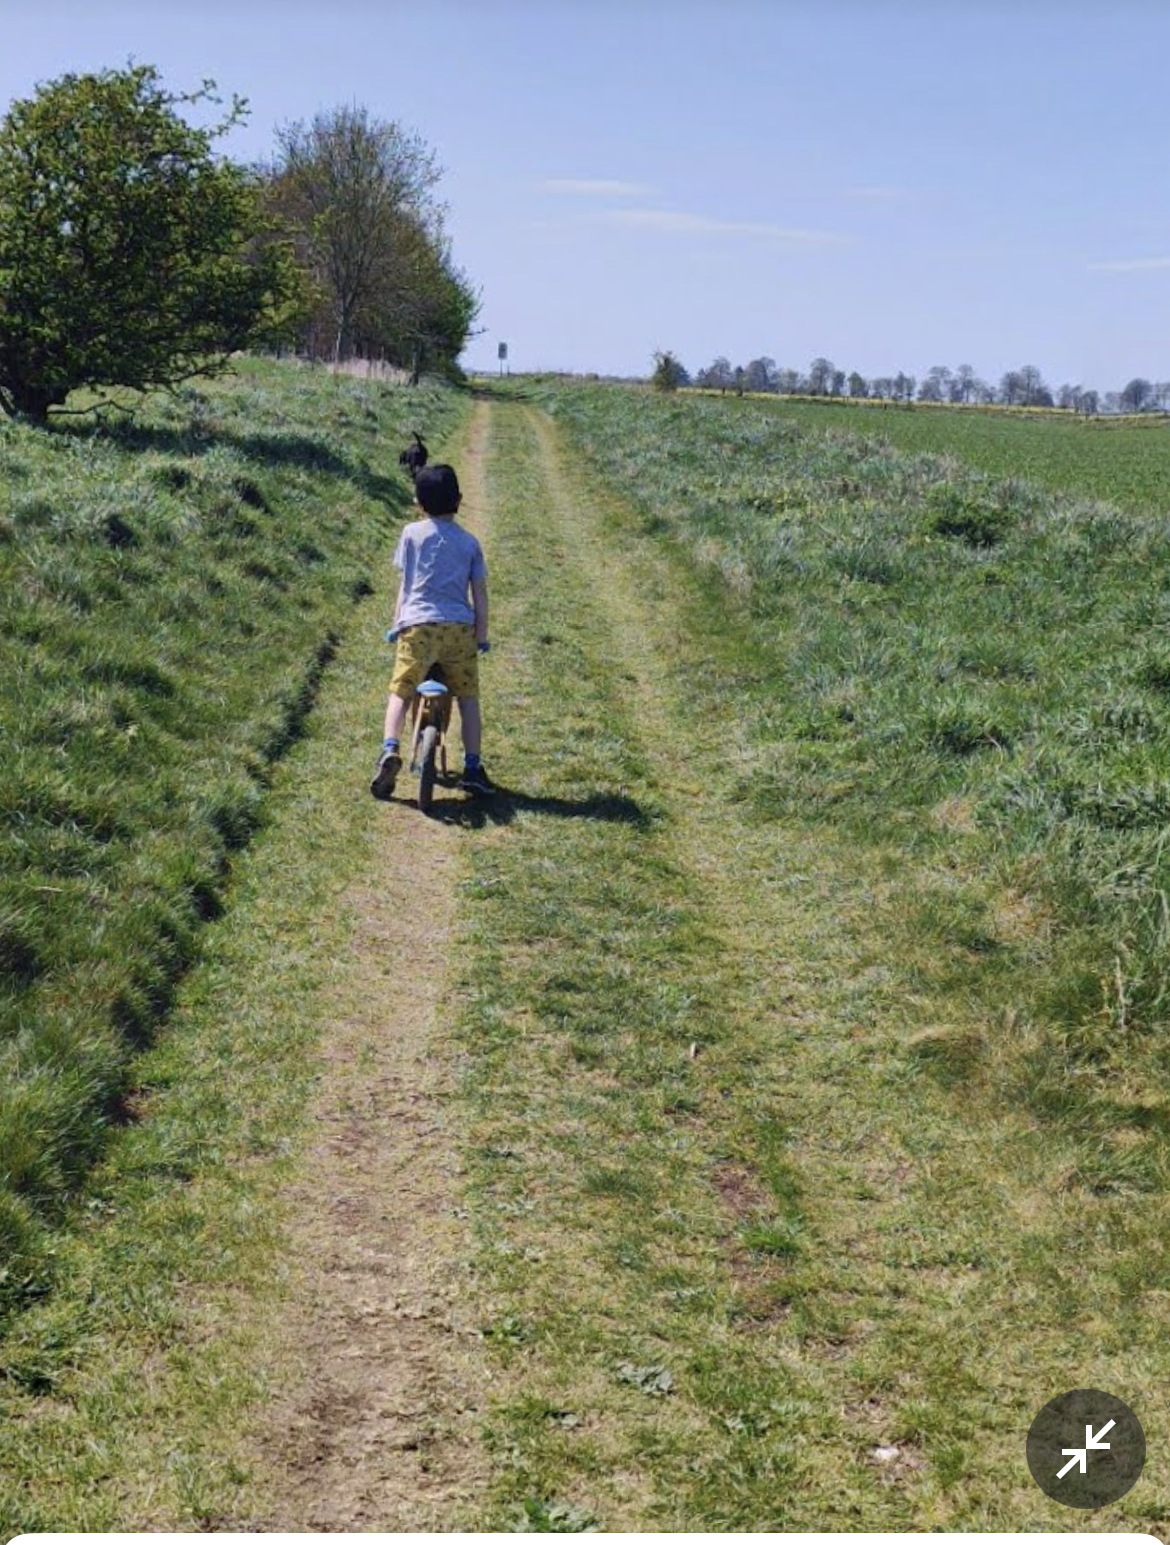 Pistonheads - The image shows a young boy riding a bike on a dirt path. He appears to be alone in the scene, which takes place in a rural area with open fields and sparse vegetation around. The setting suggests it might be during the day due to the bright lighting conditions. In the background, there are no significant structures or landmarks that provide context or location details.